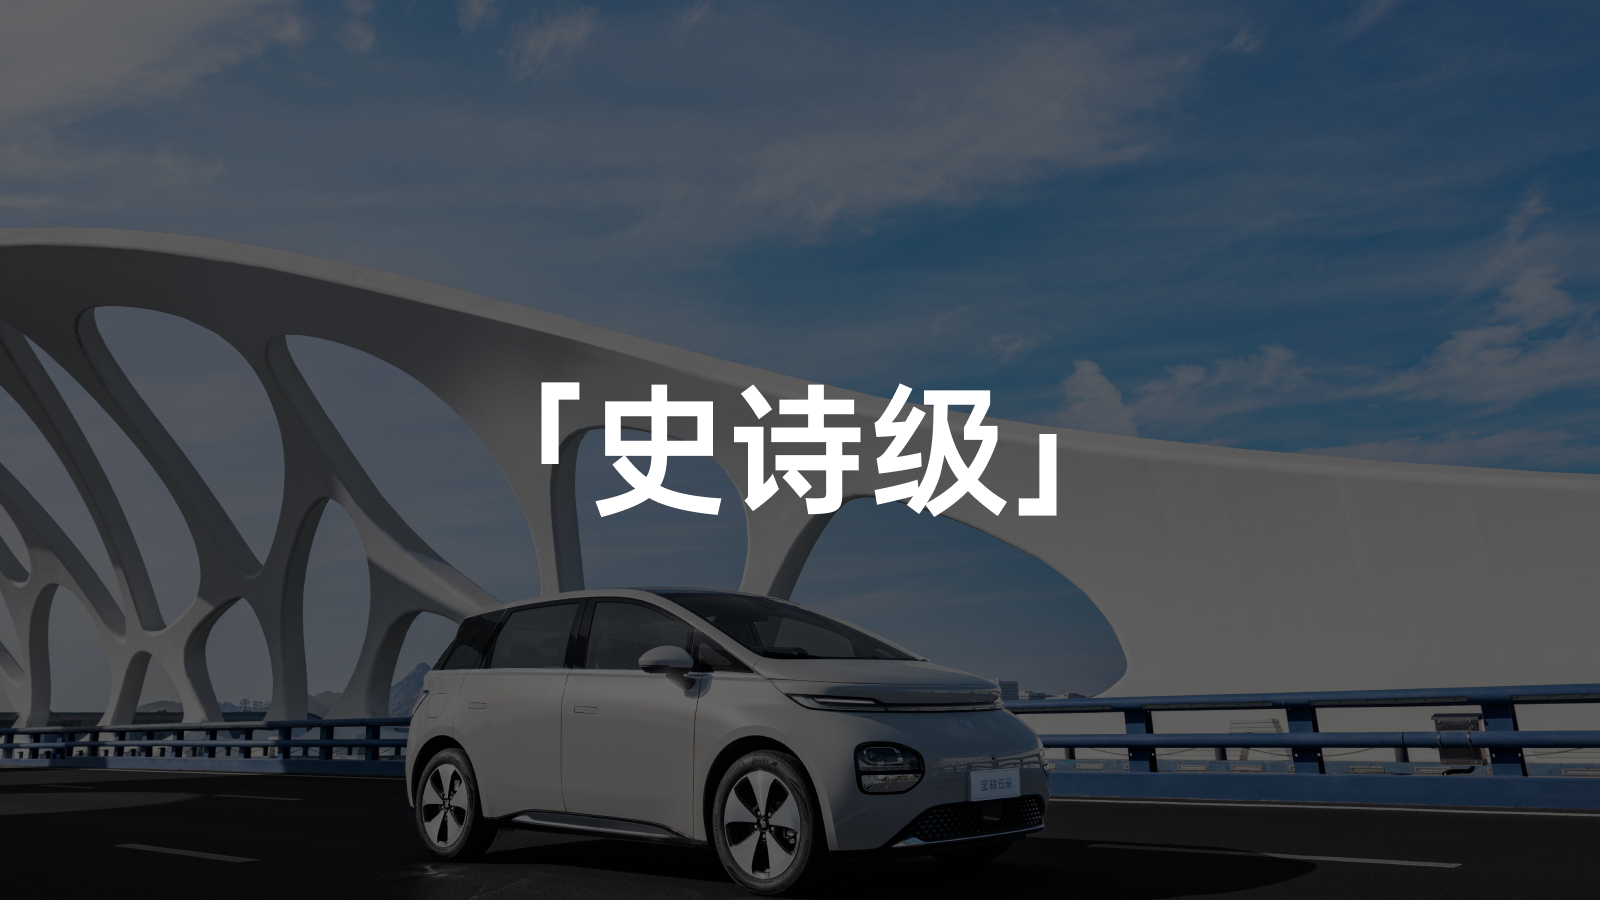 BAOJUN Launches Epic Quality EV with Affordable Price?